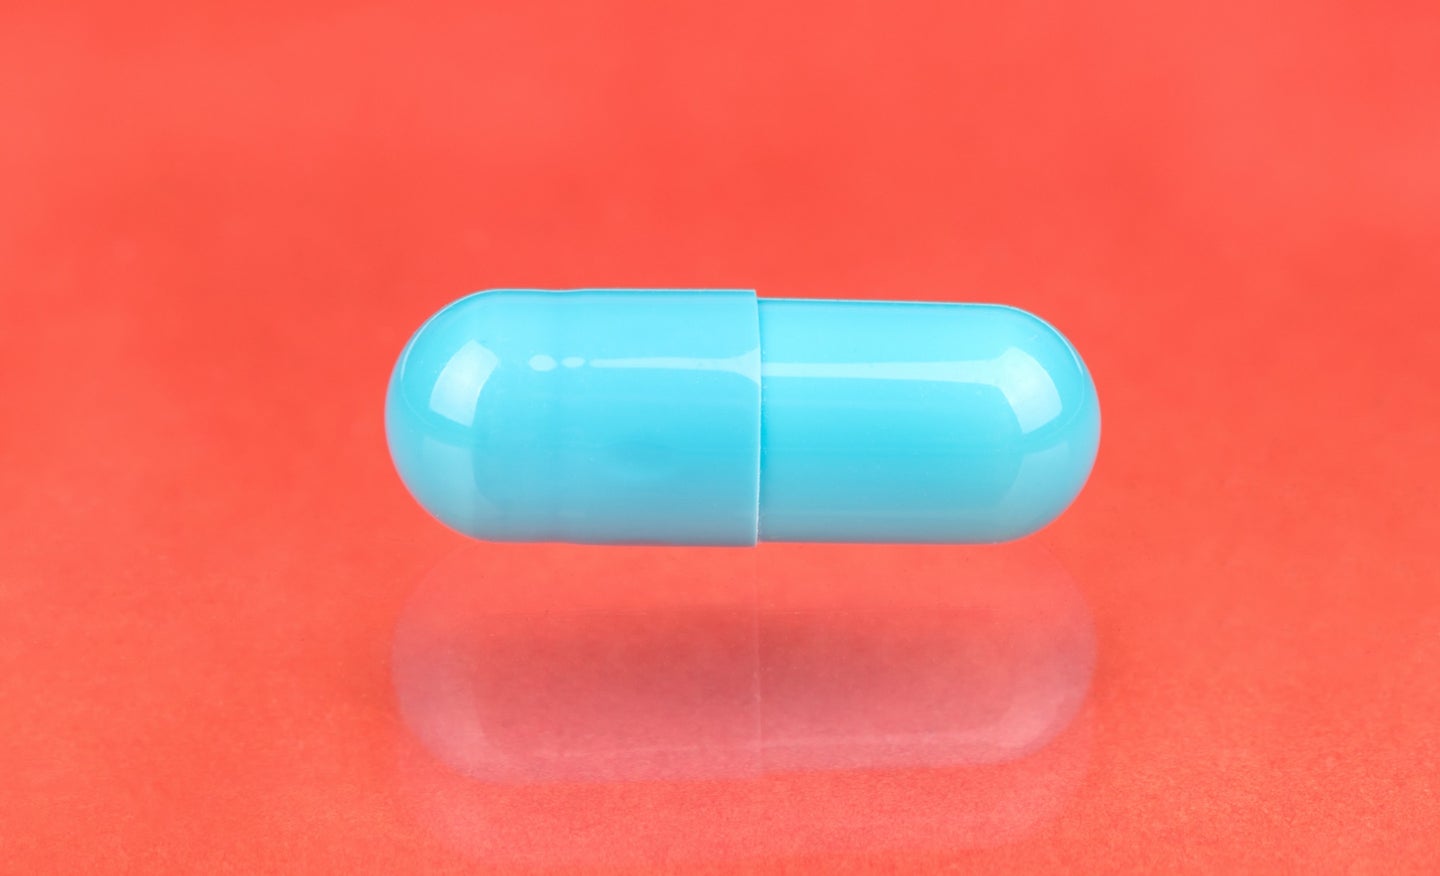 Doxycycline antibiotic pill for STI and STD prevention on a coral background